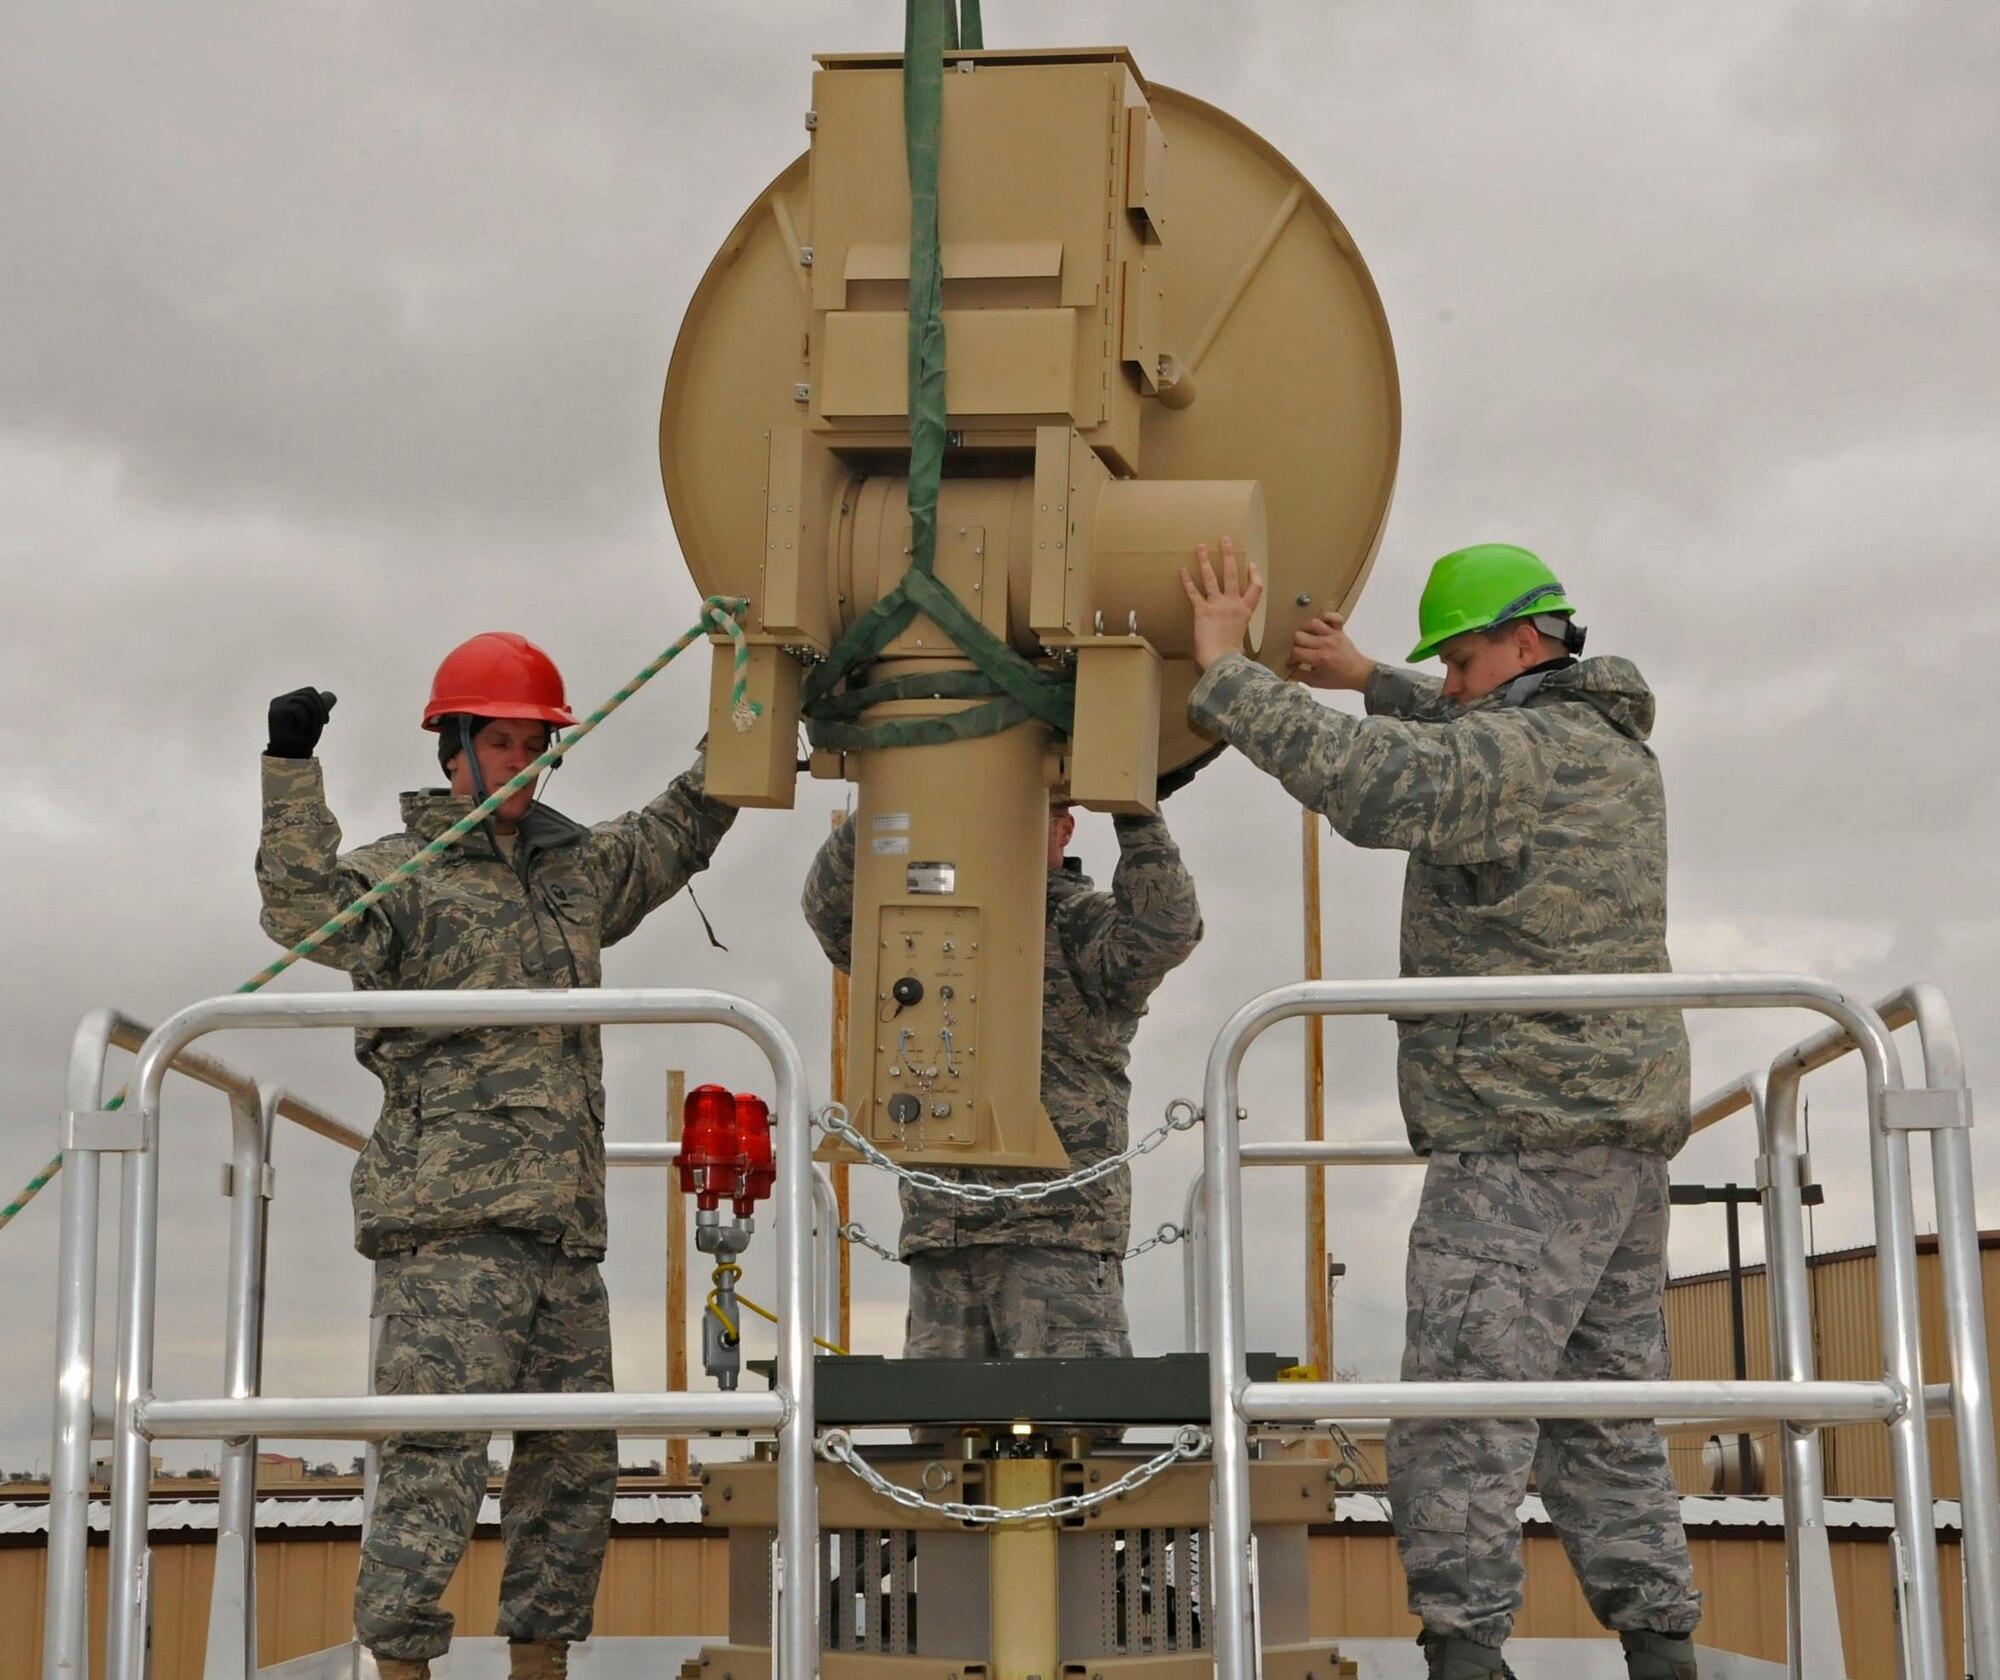 CANNON AIR FORCE BASE, N.M. -- Members of the 27th Special Operations Aircraft Maintenance Squadron, help guide a ground data terminal antenna on a trailer here, Oct. 26. 27 SOAMXS maintainers support flightline operations 24 hours a day, 7 days a week and are essential to the mission. (U.S. Air Force photo/ Senior Airman Erik Cardenas)